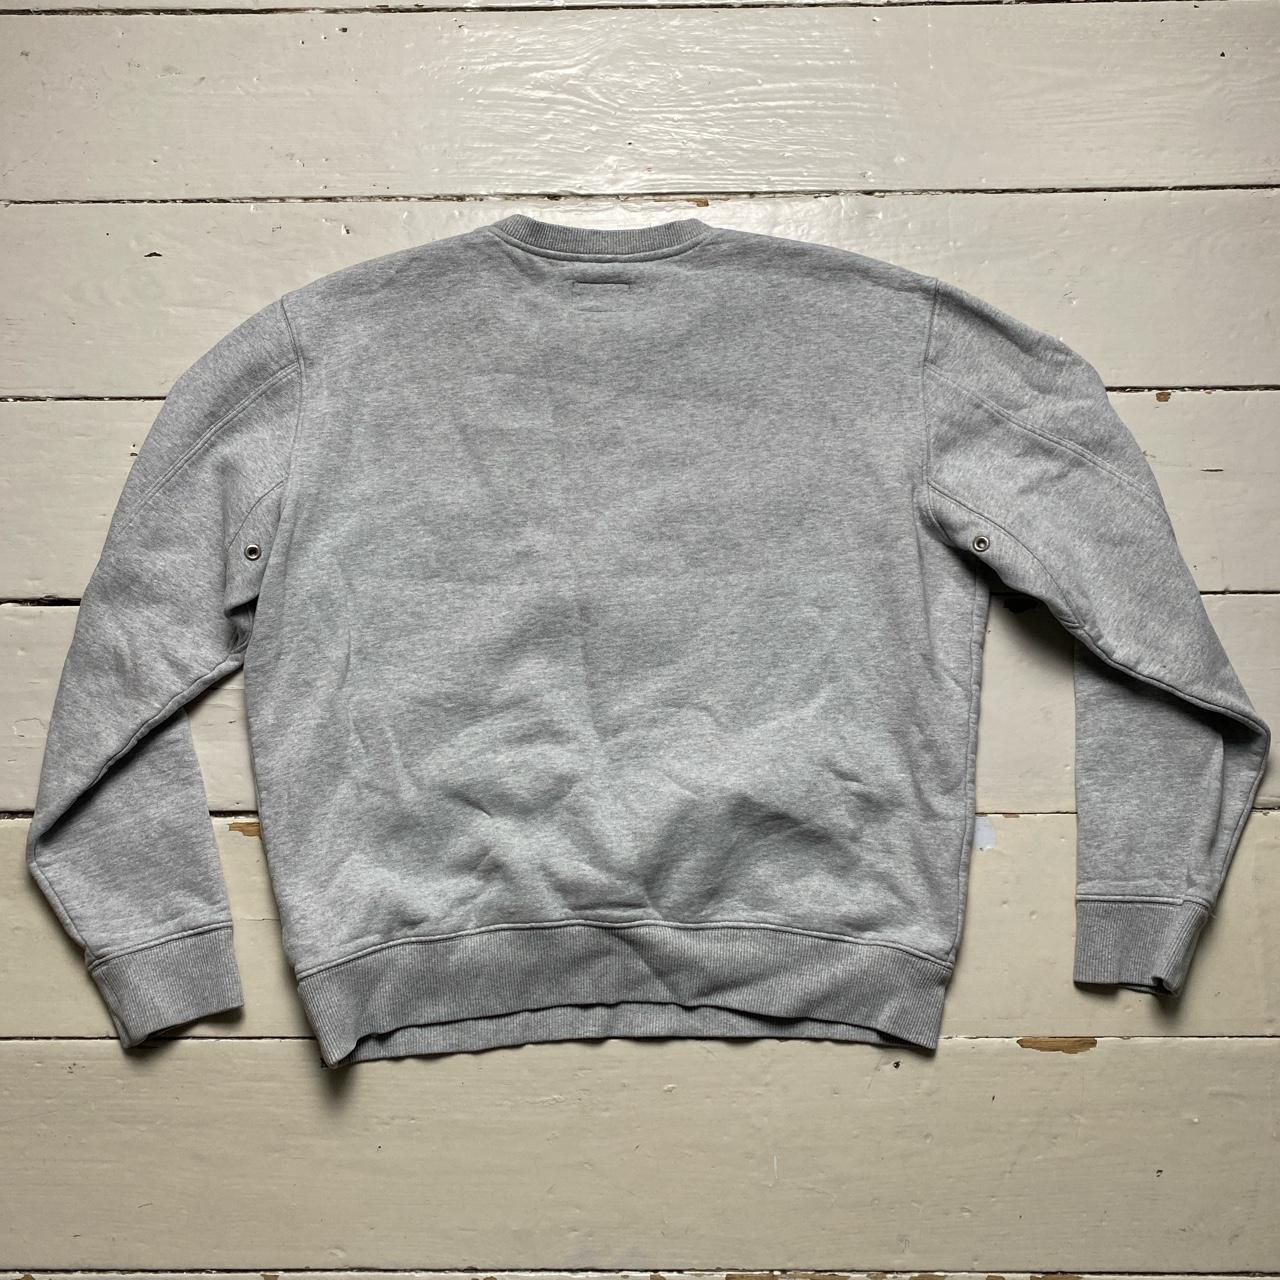 Timberland Grey Embroidered Jumper